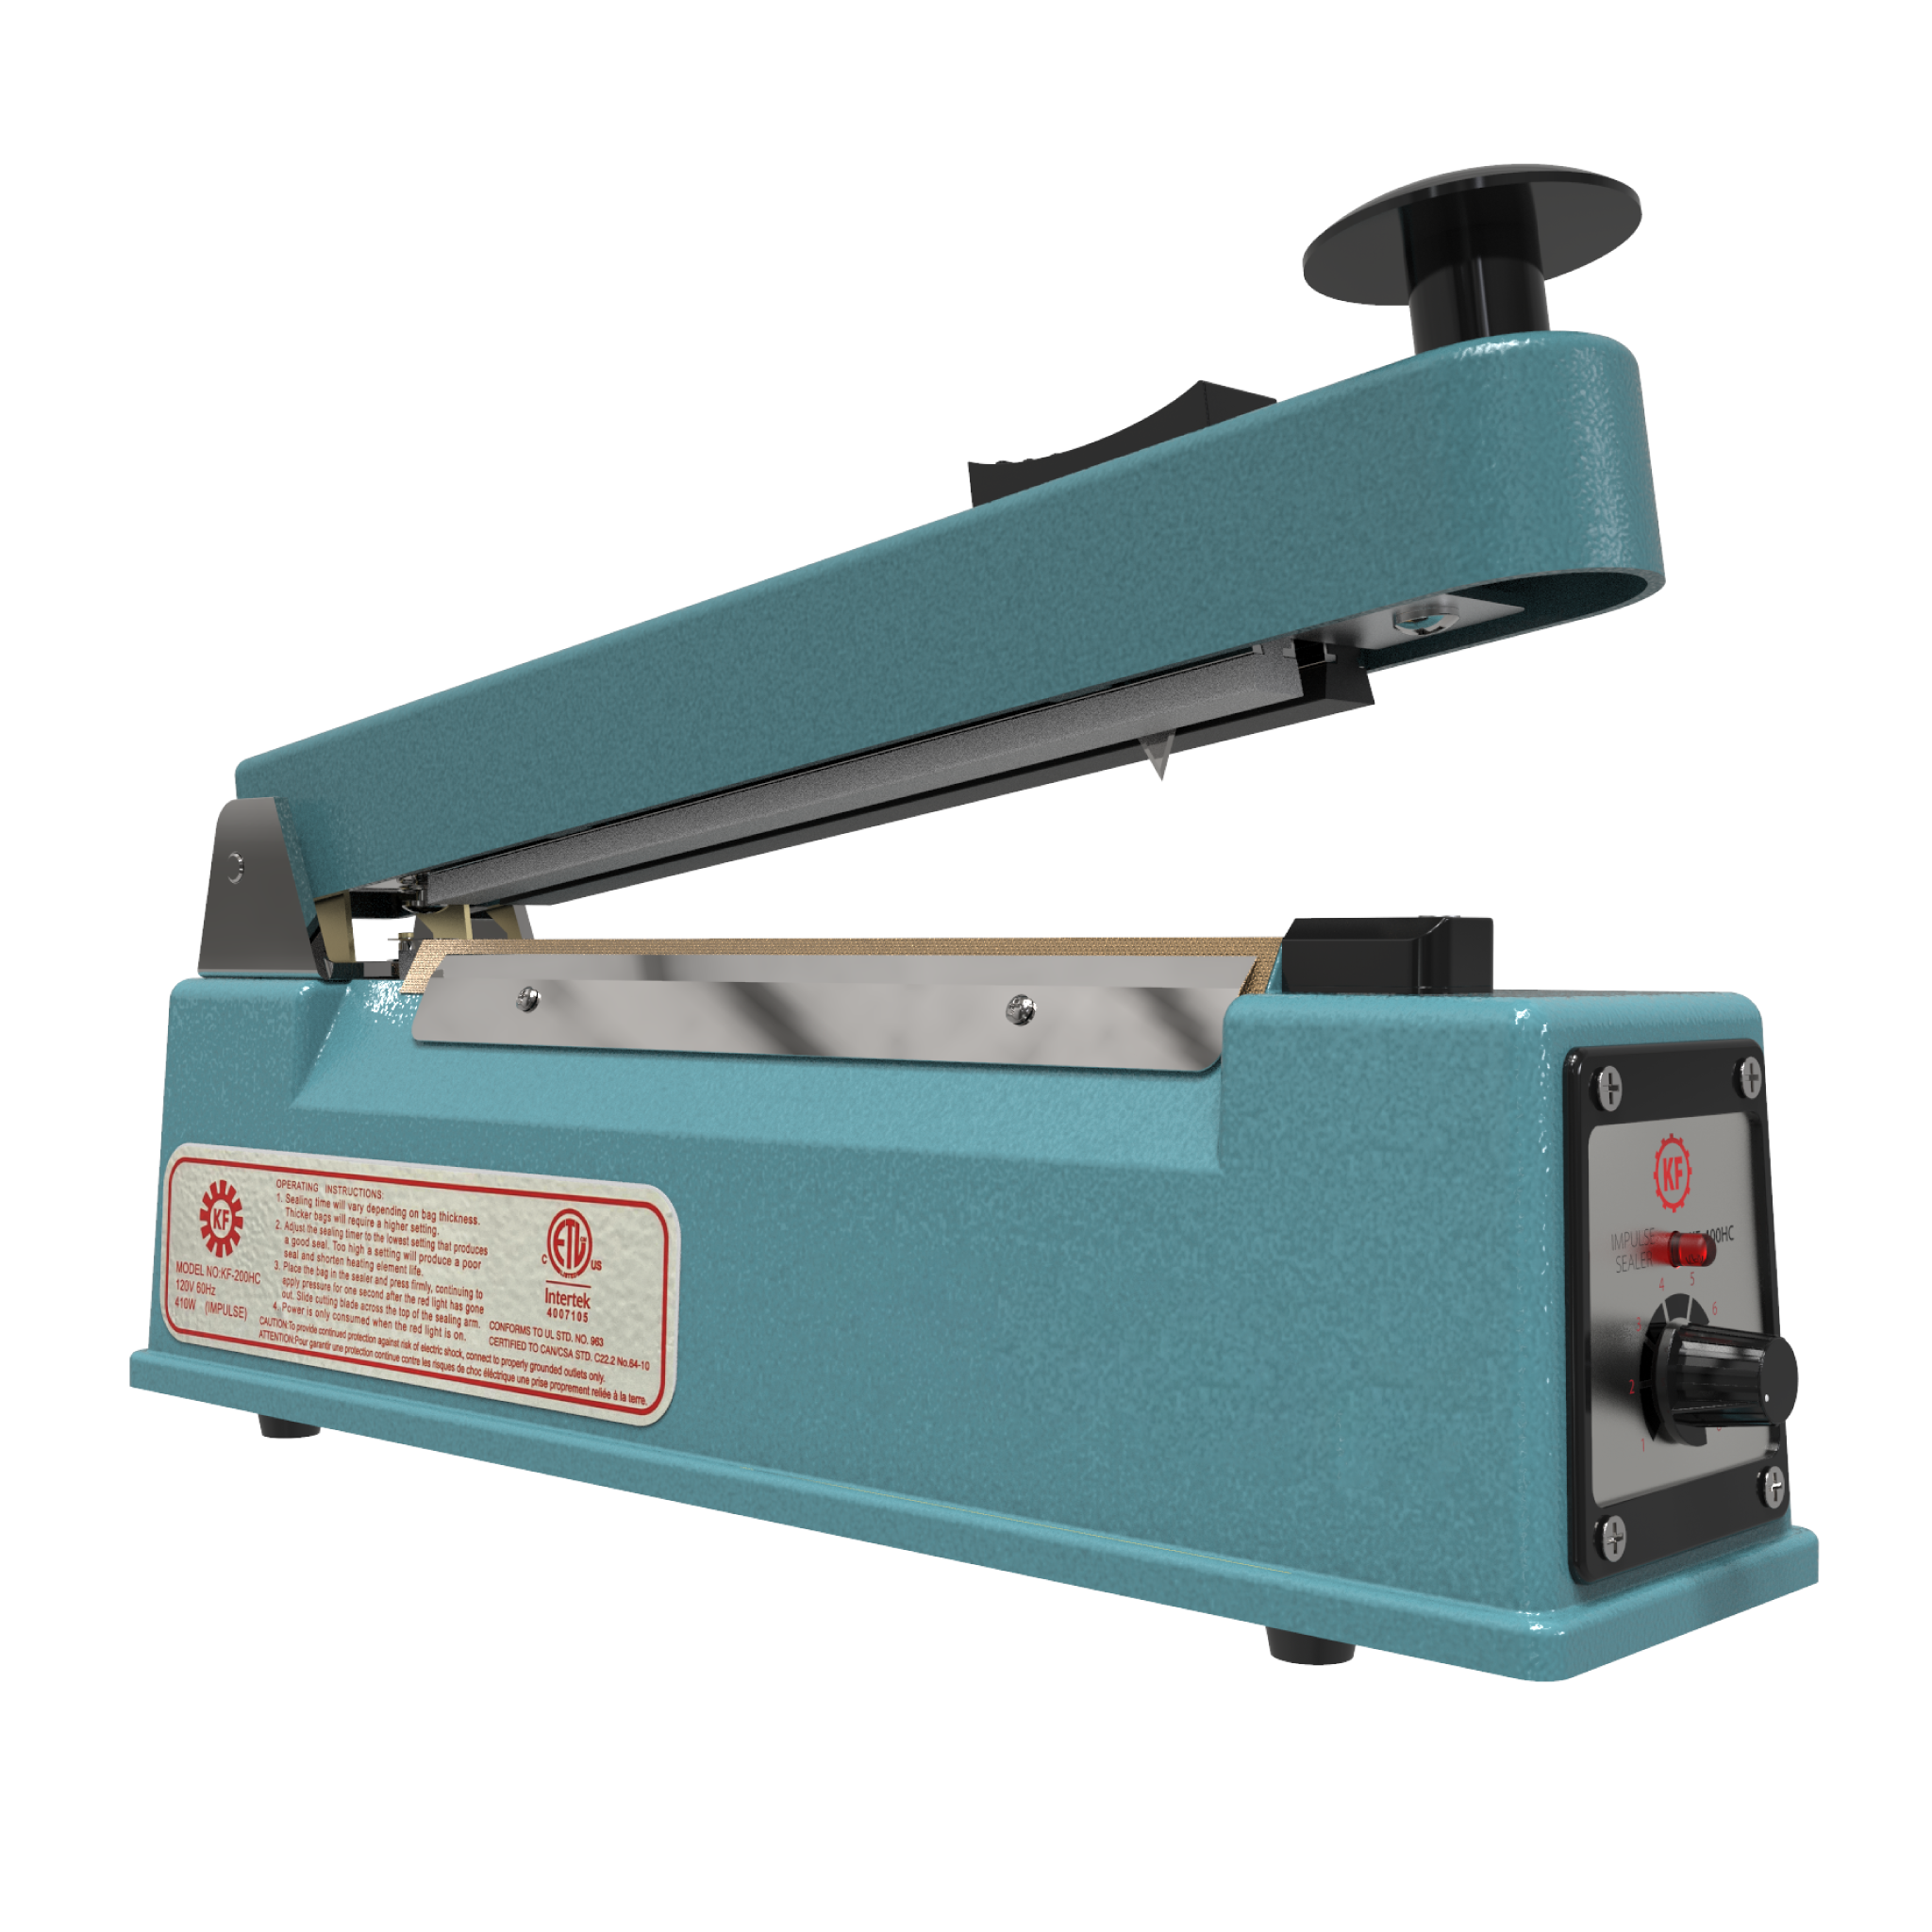 IEDCO's Bag Cutter/Discharger Makes Bag Handling Safe And Simple